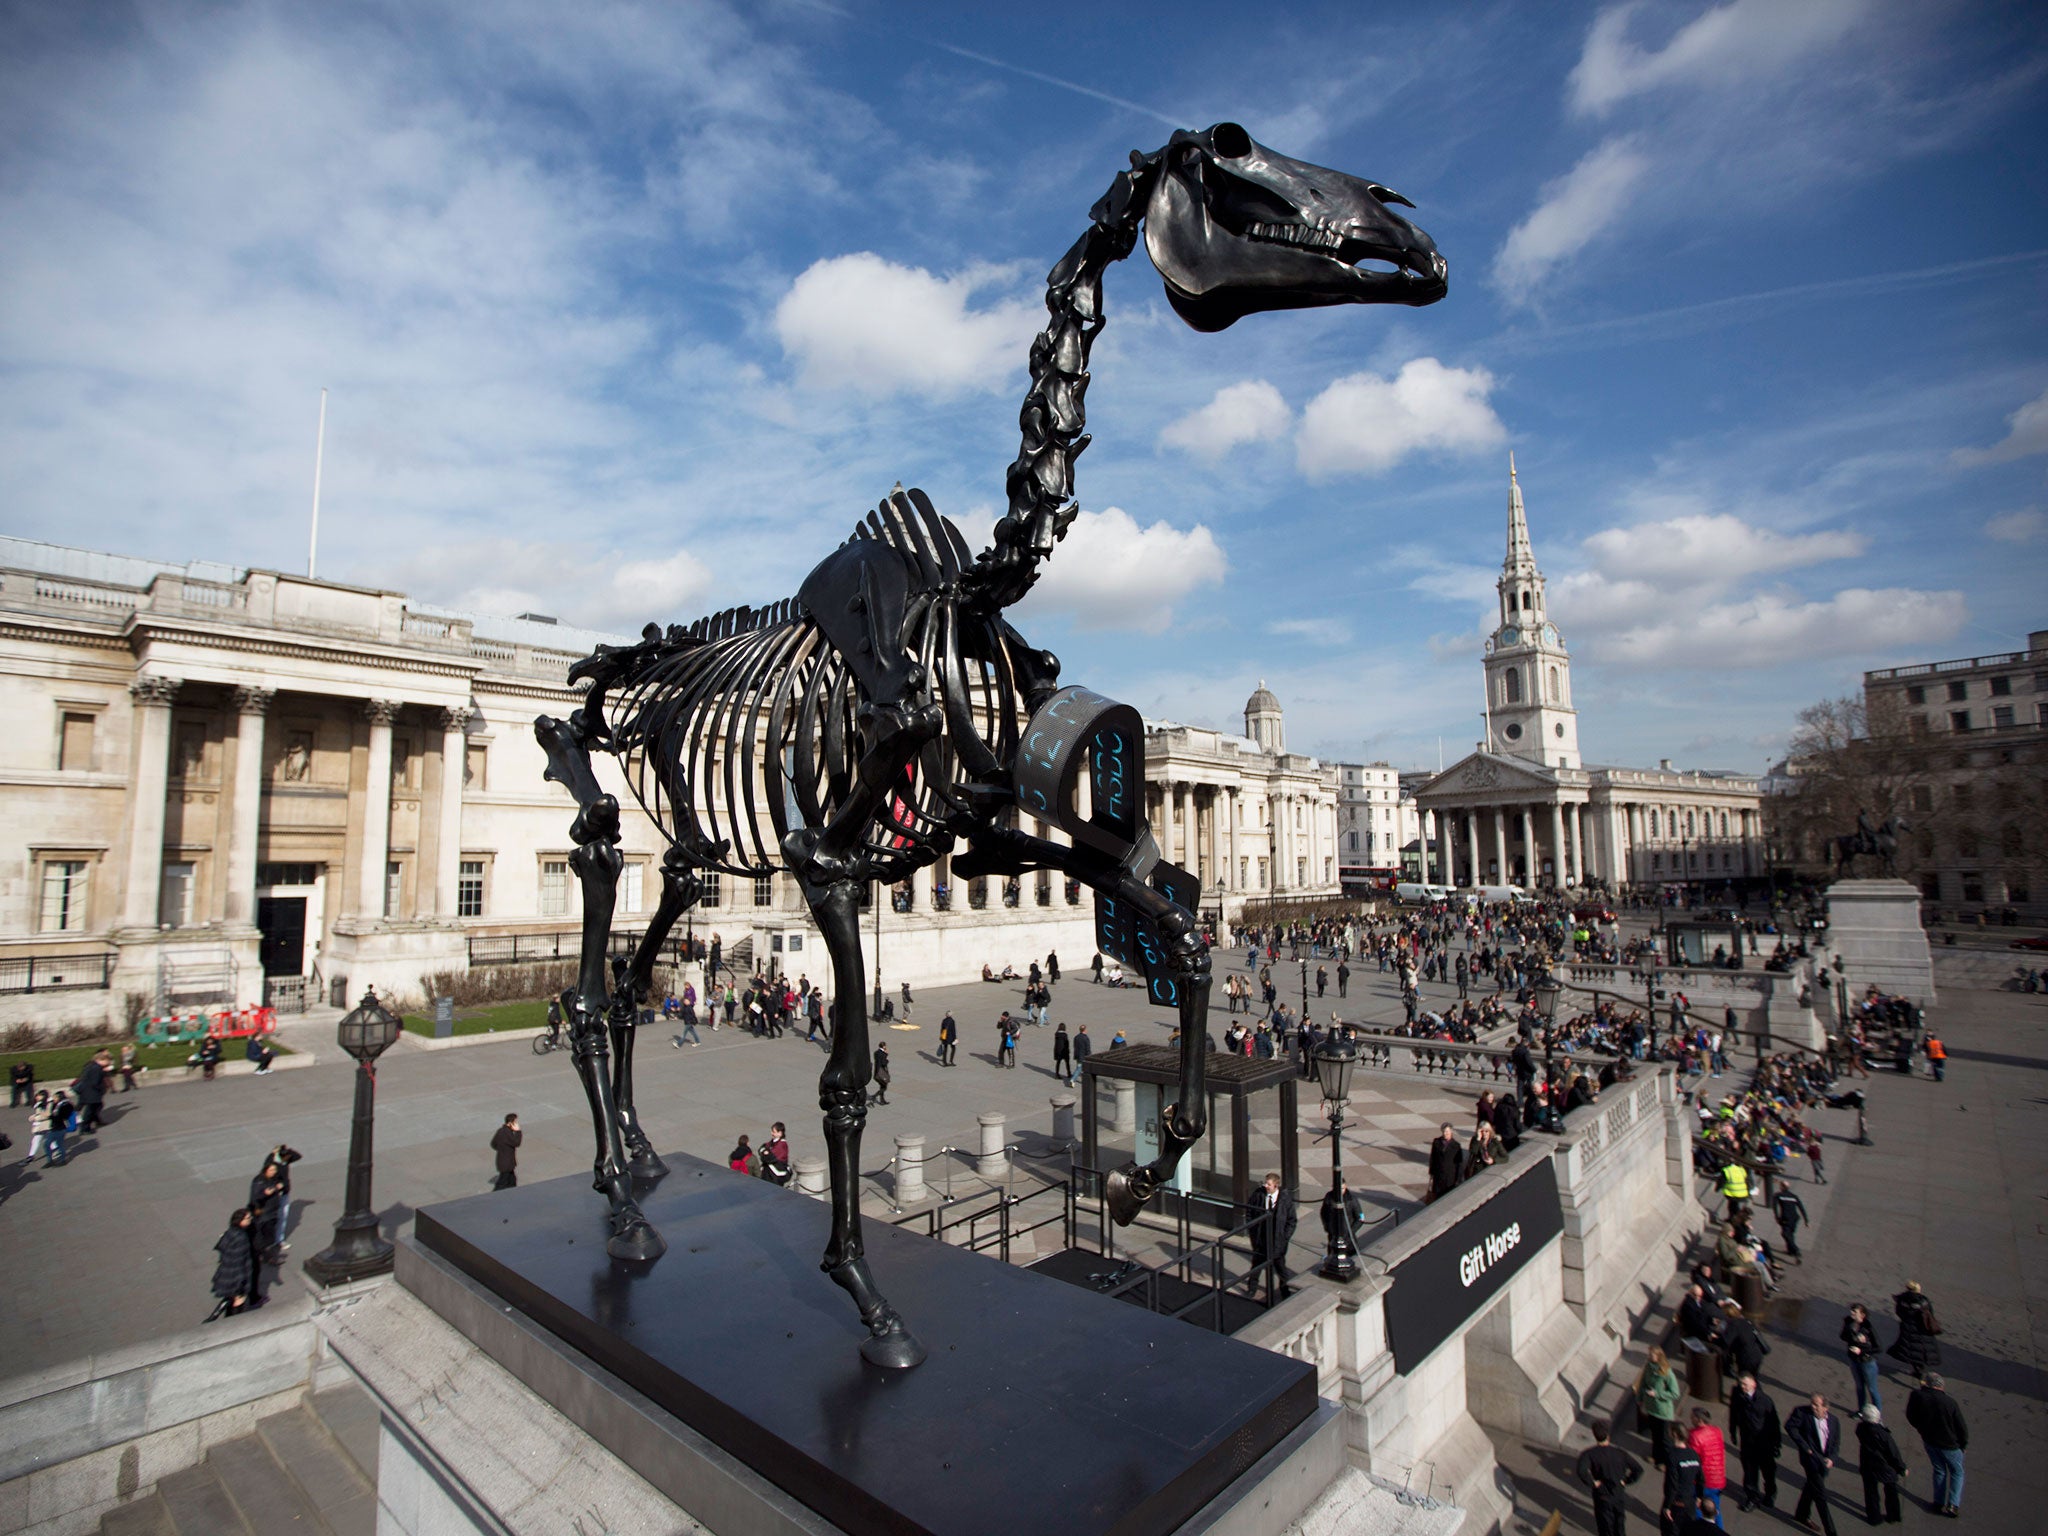 The sculpture "Gift Horse", which portrays a skeletal horse by German-born artist Hans Haacke, stands above Trafalgar Square after it was unveiled as the new commission for the Fourth Plinth, in London